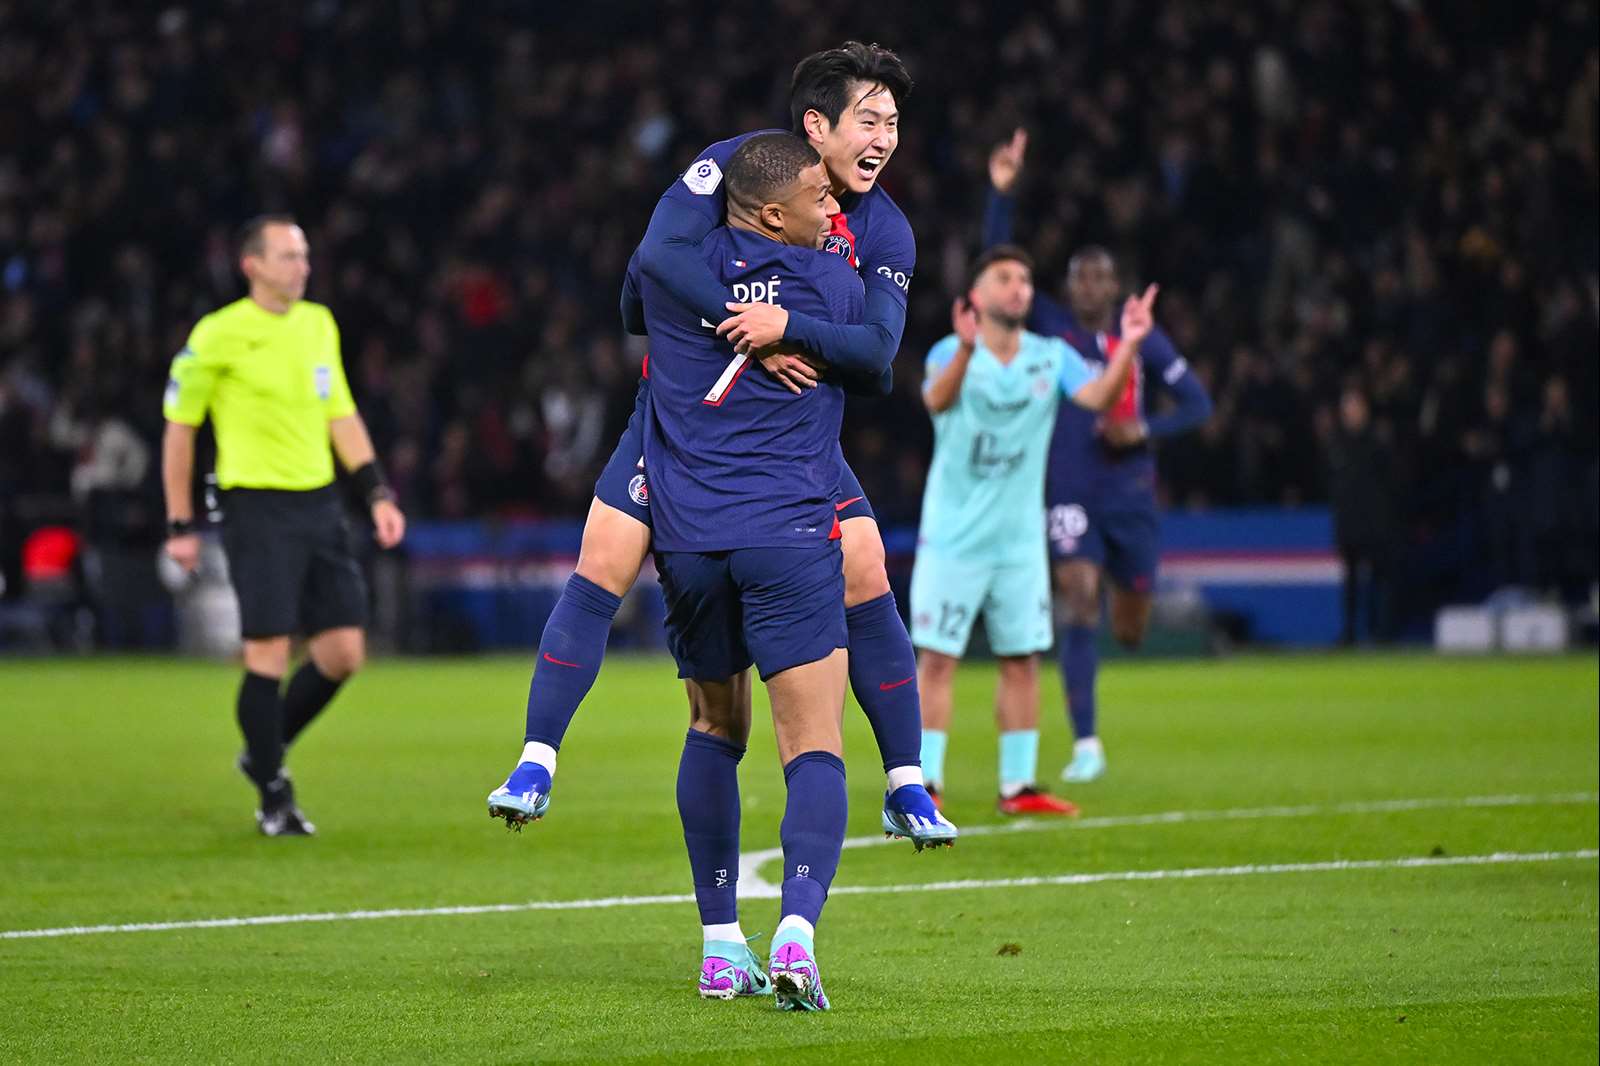 PSG go top with 3-0 win over Montpellier